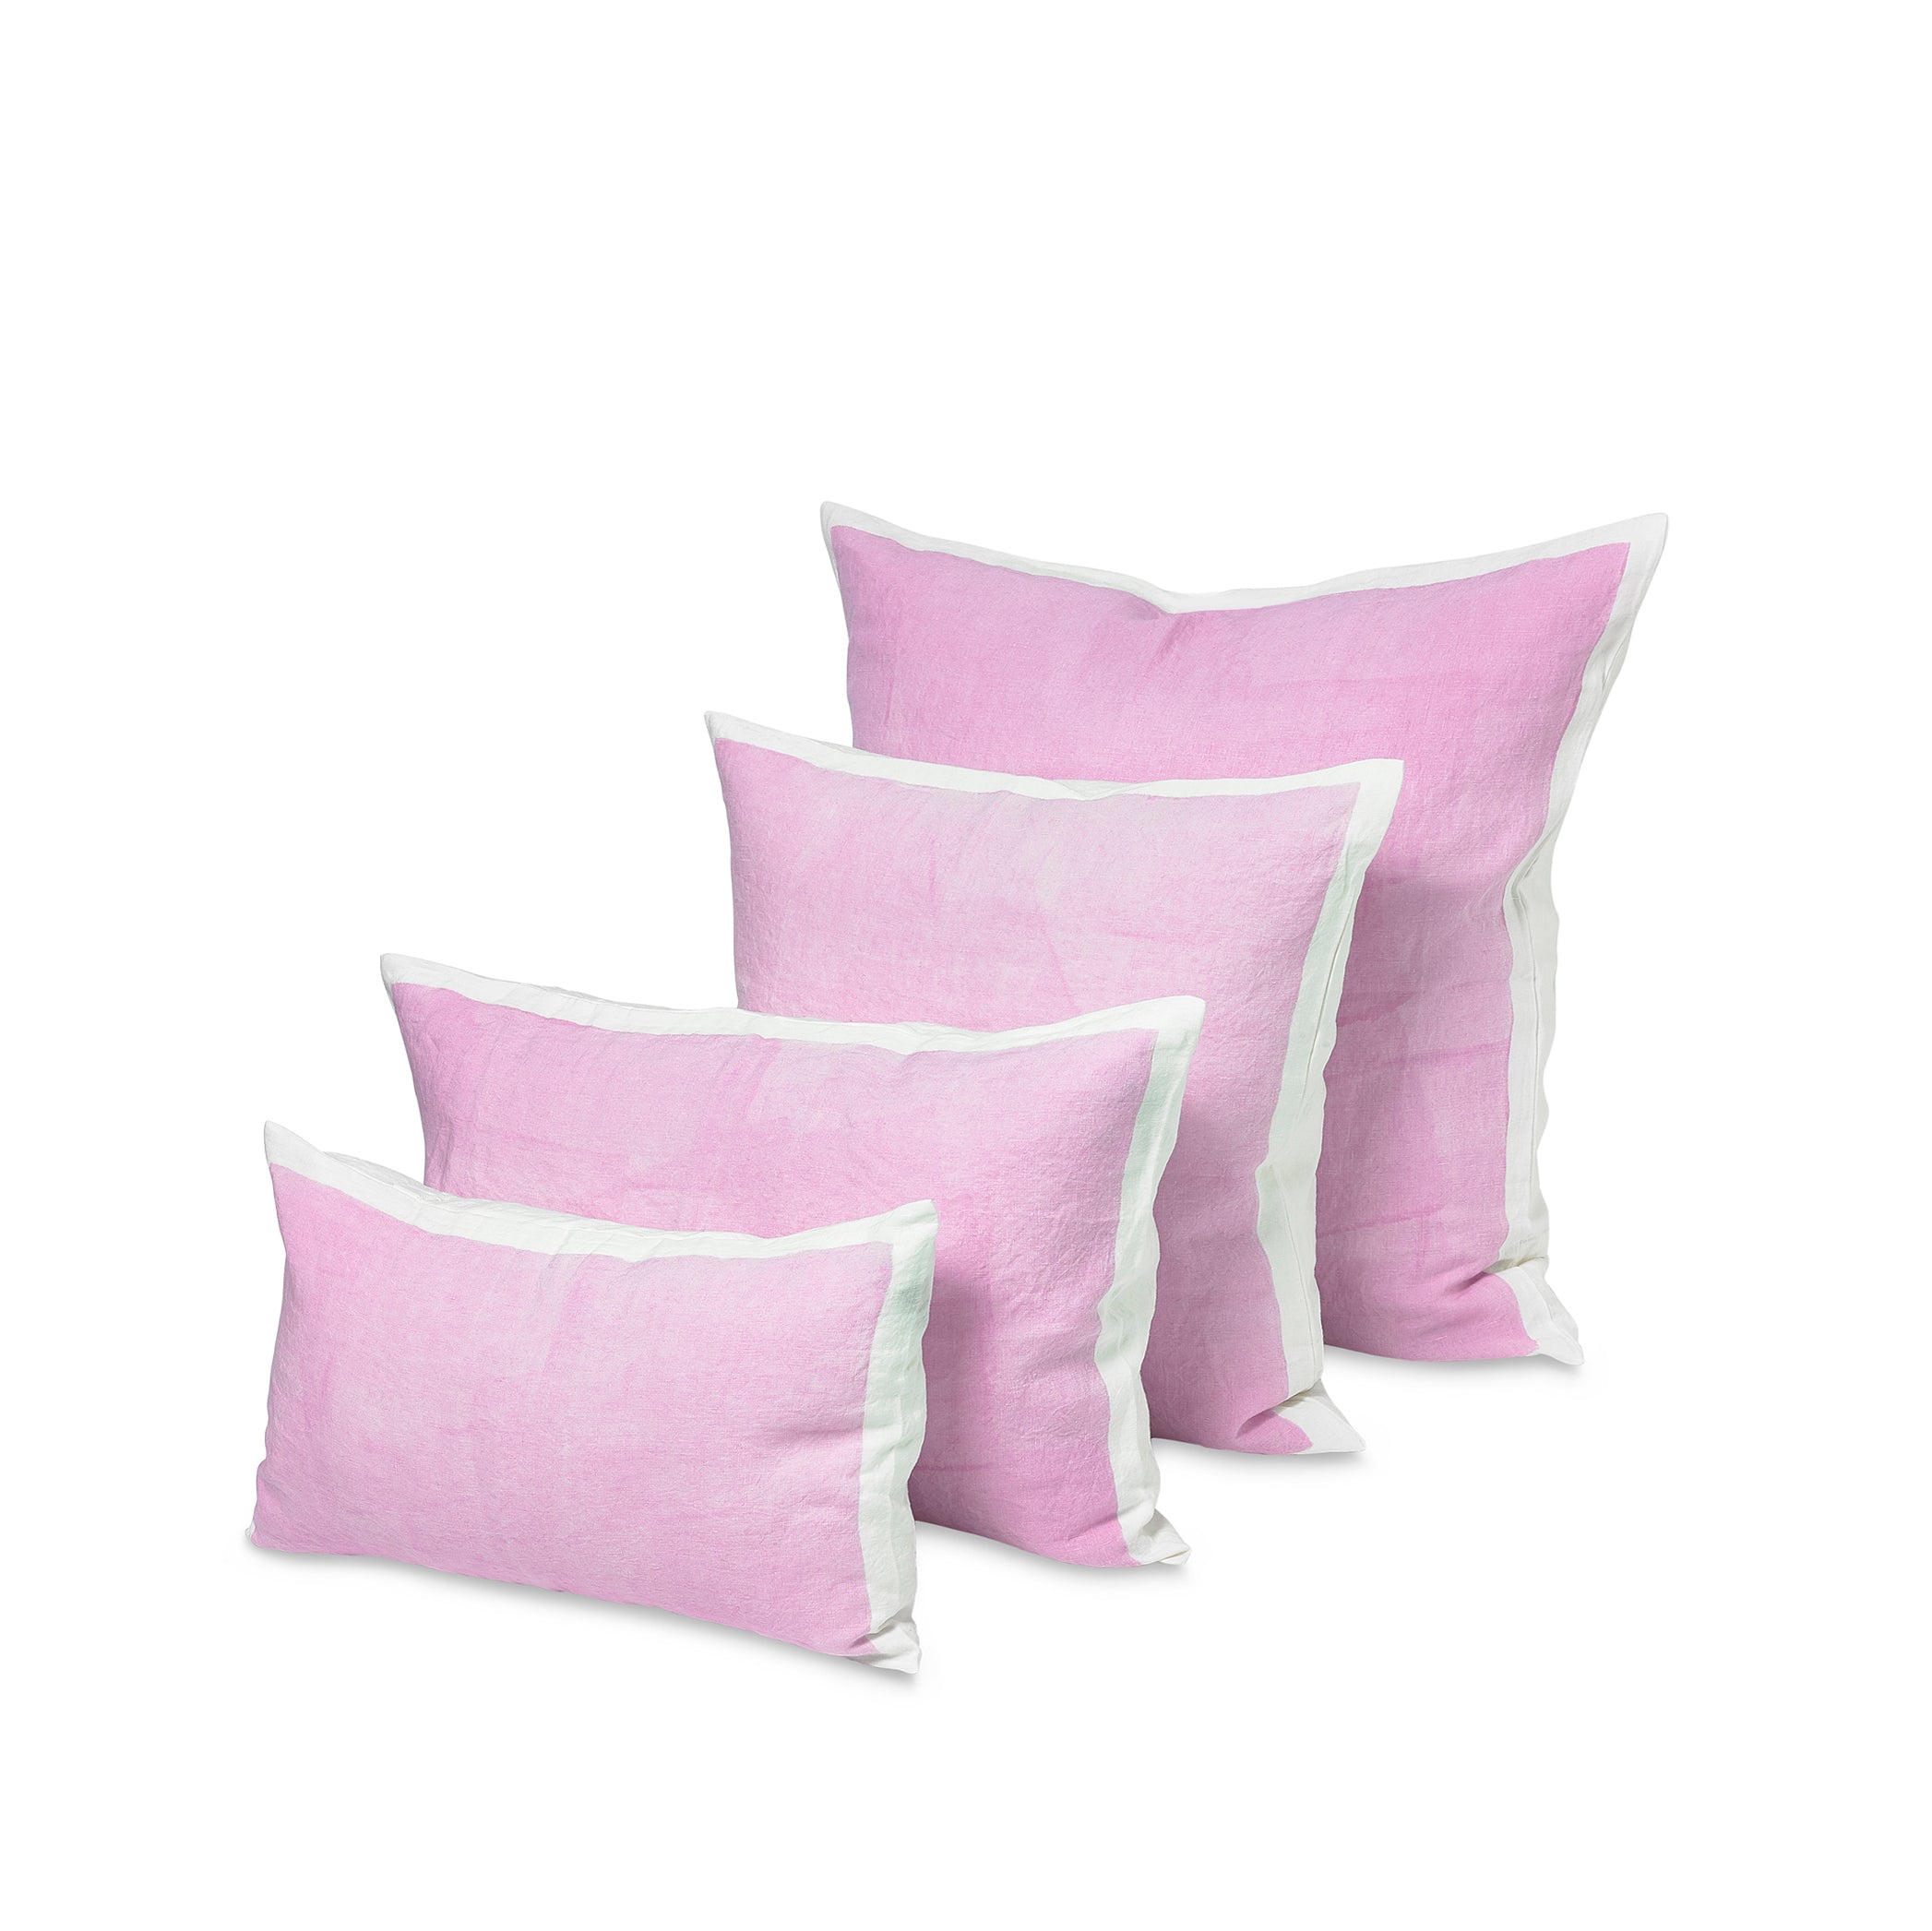 Hand Painted Linen Cushion in Pale Pink, 50cm x 30cm